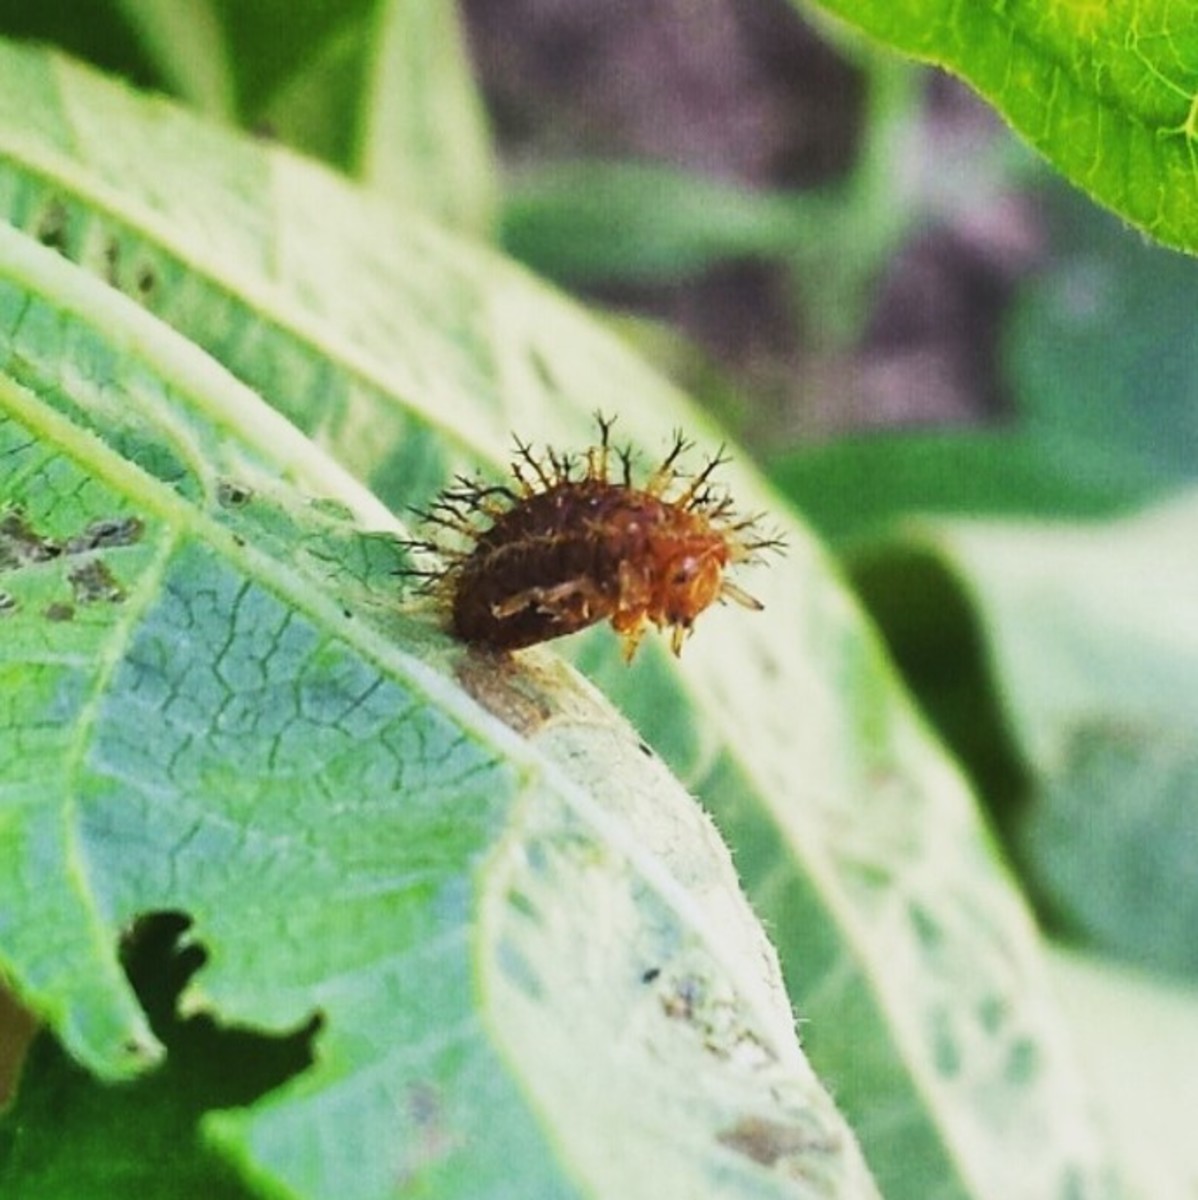 The larvae attach themselves to the undersides of the leaves to pupate into adults.